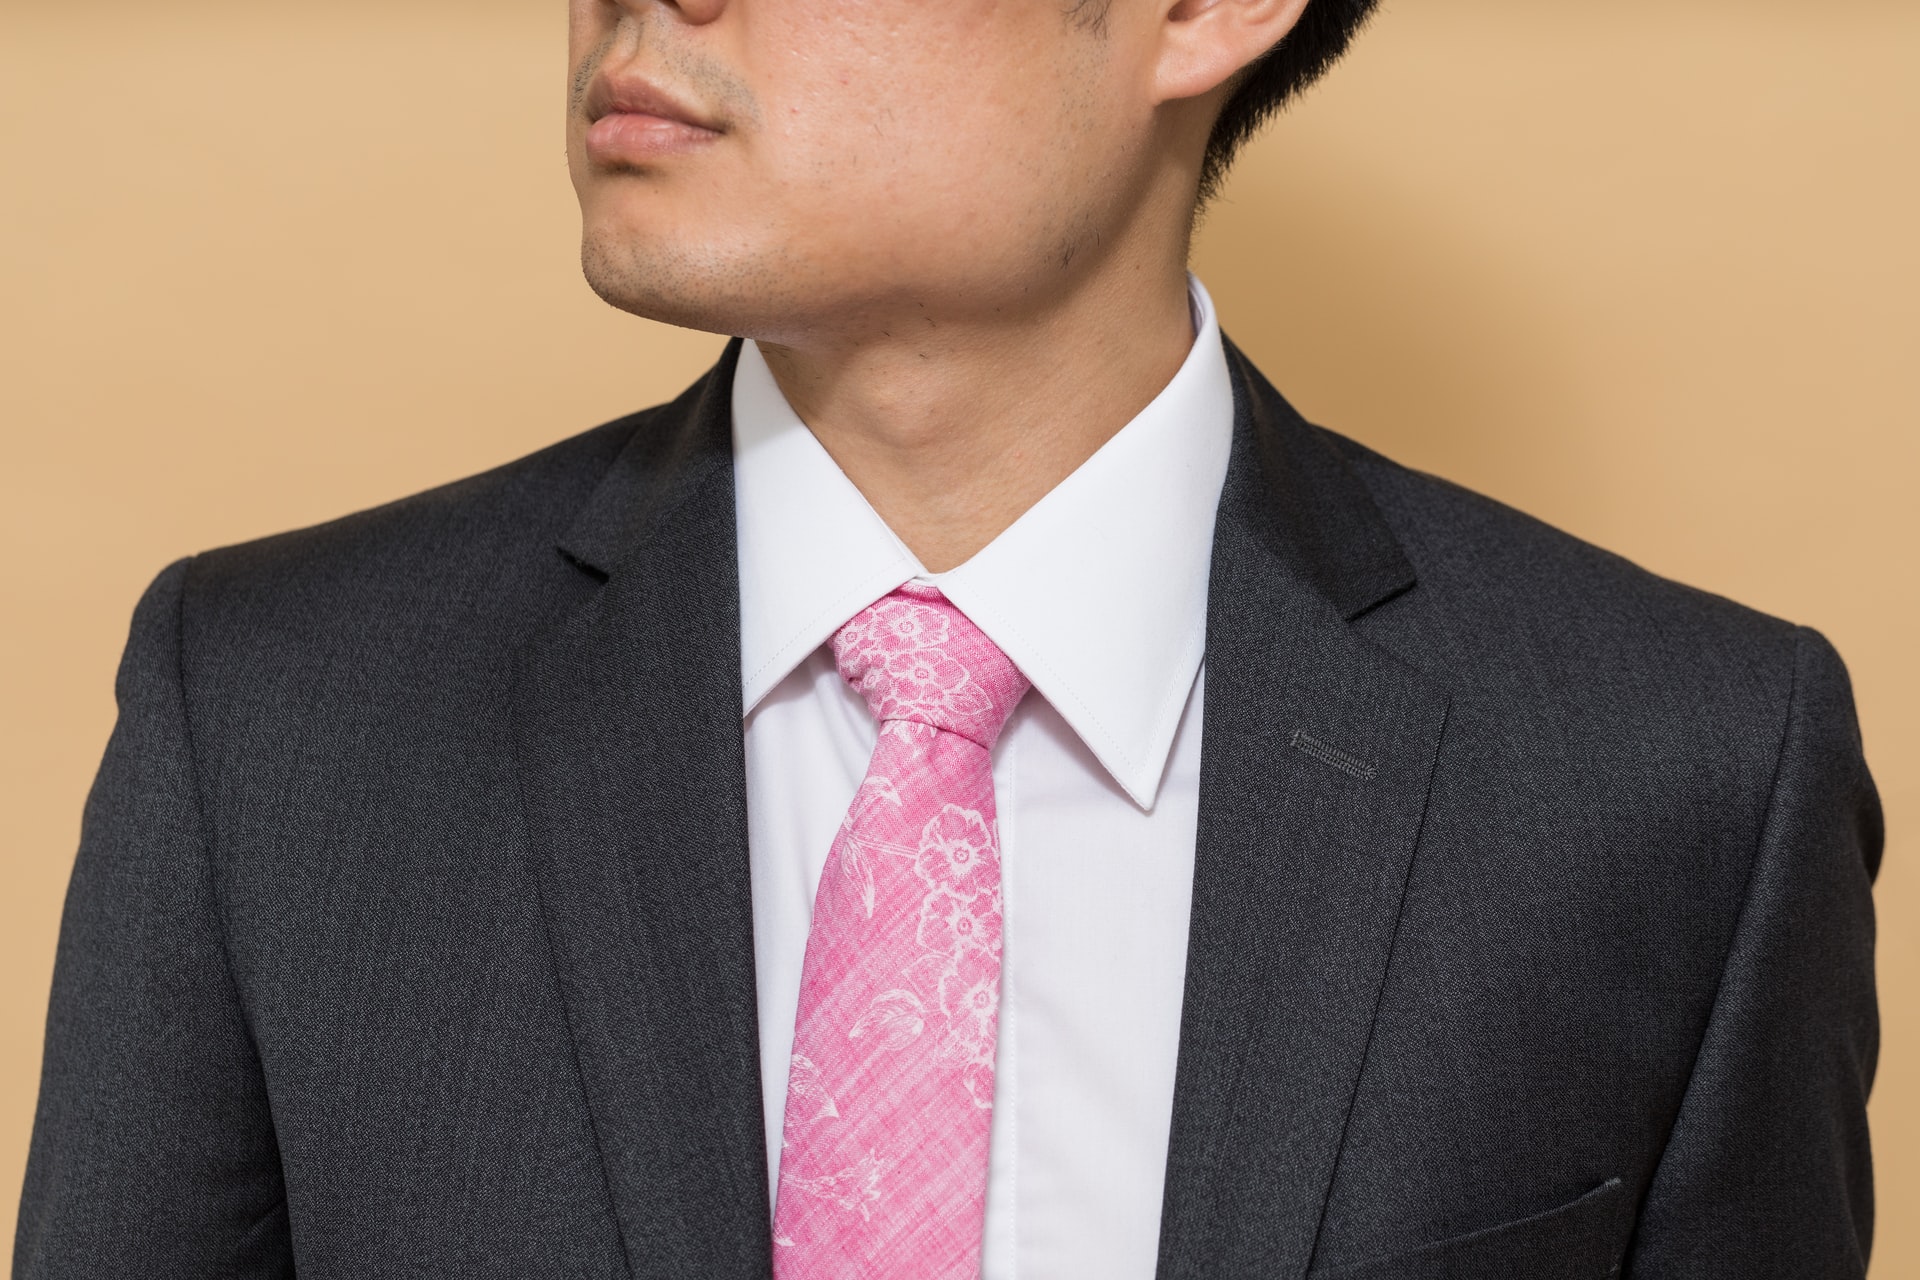 groom wearing a pink necktie with a floral pattern